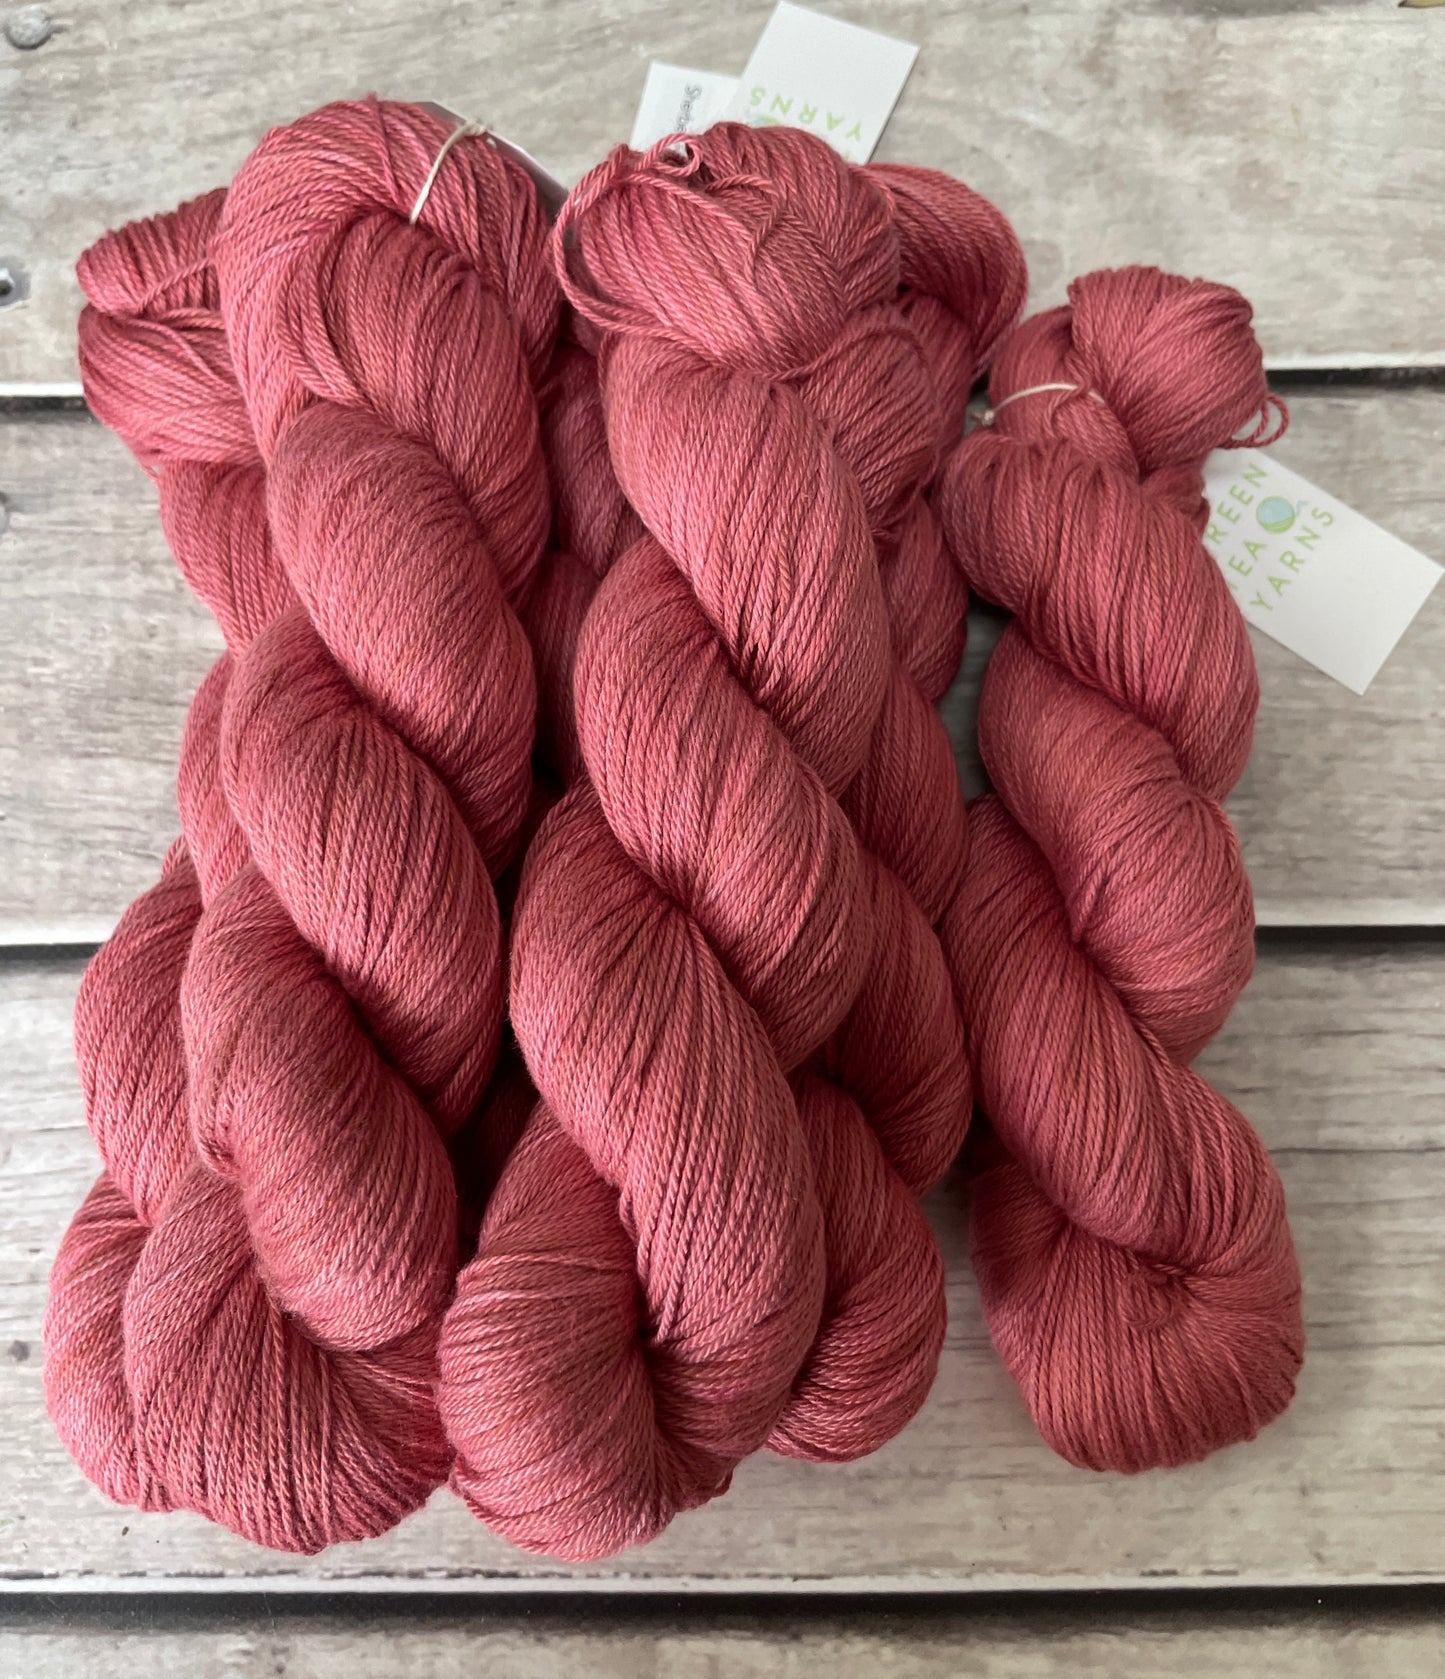 Sherbet Fizz on Camelia - silk and cotton 4 ply